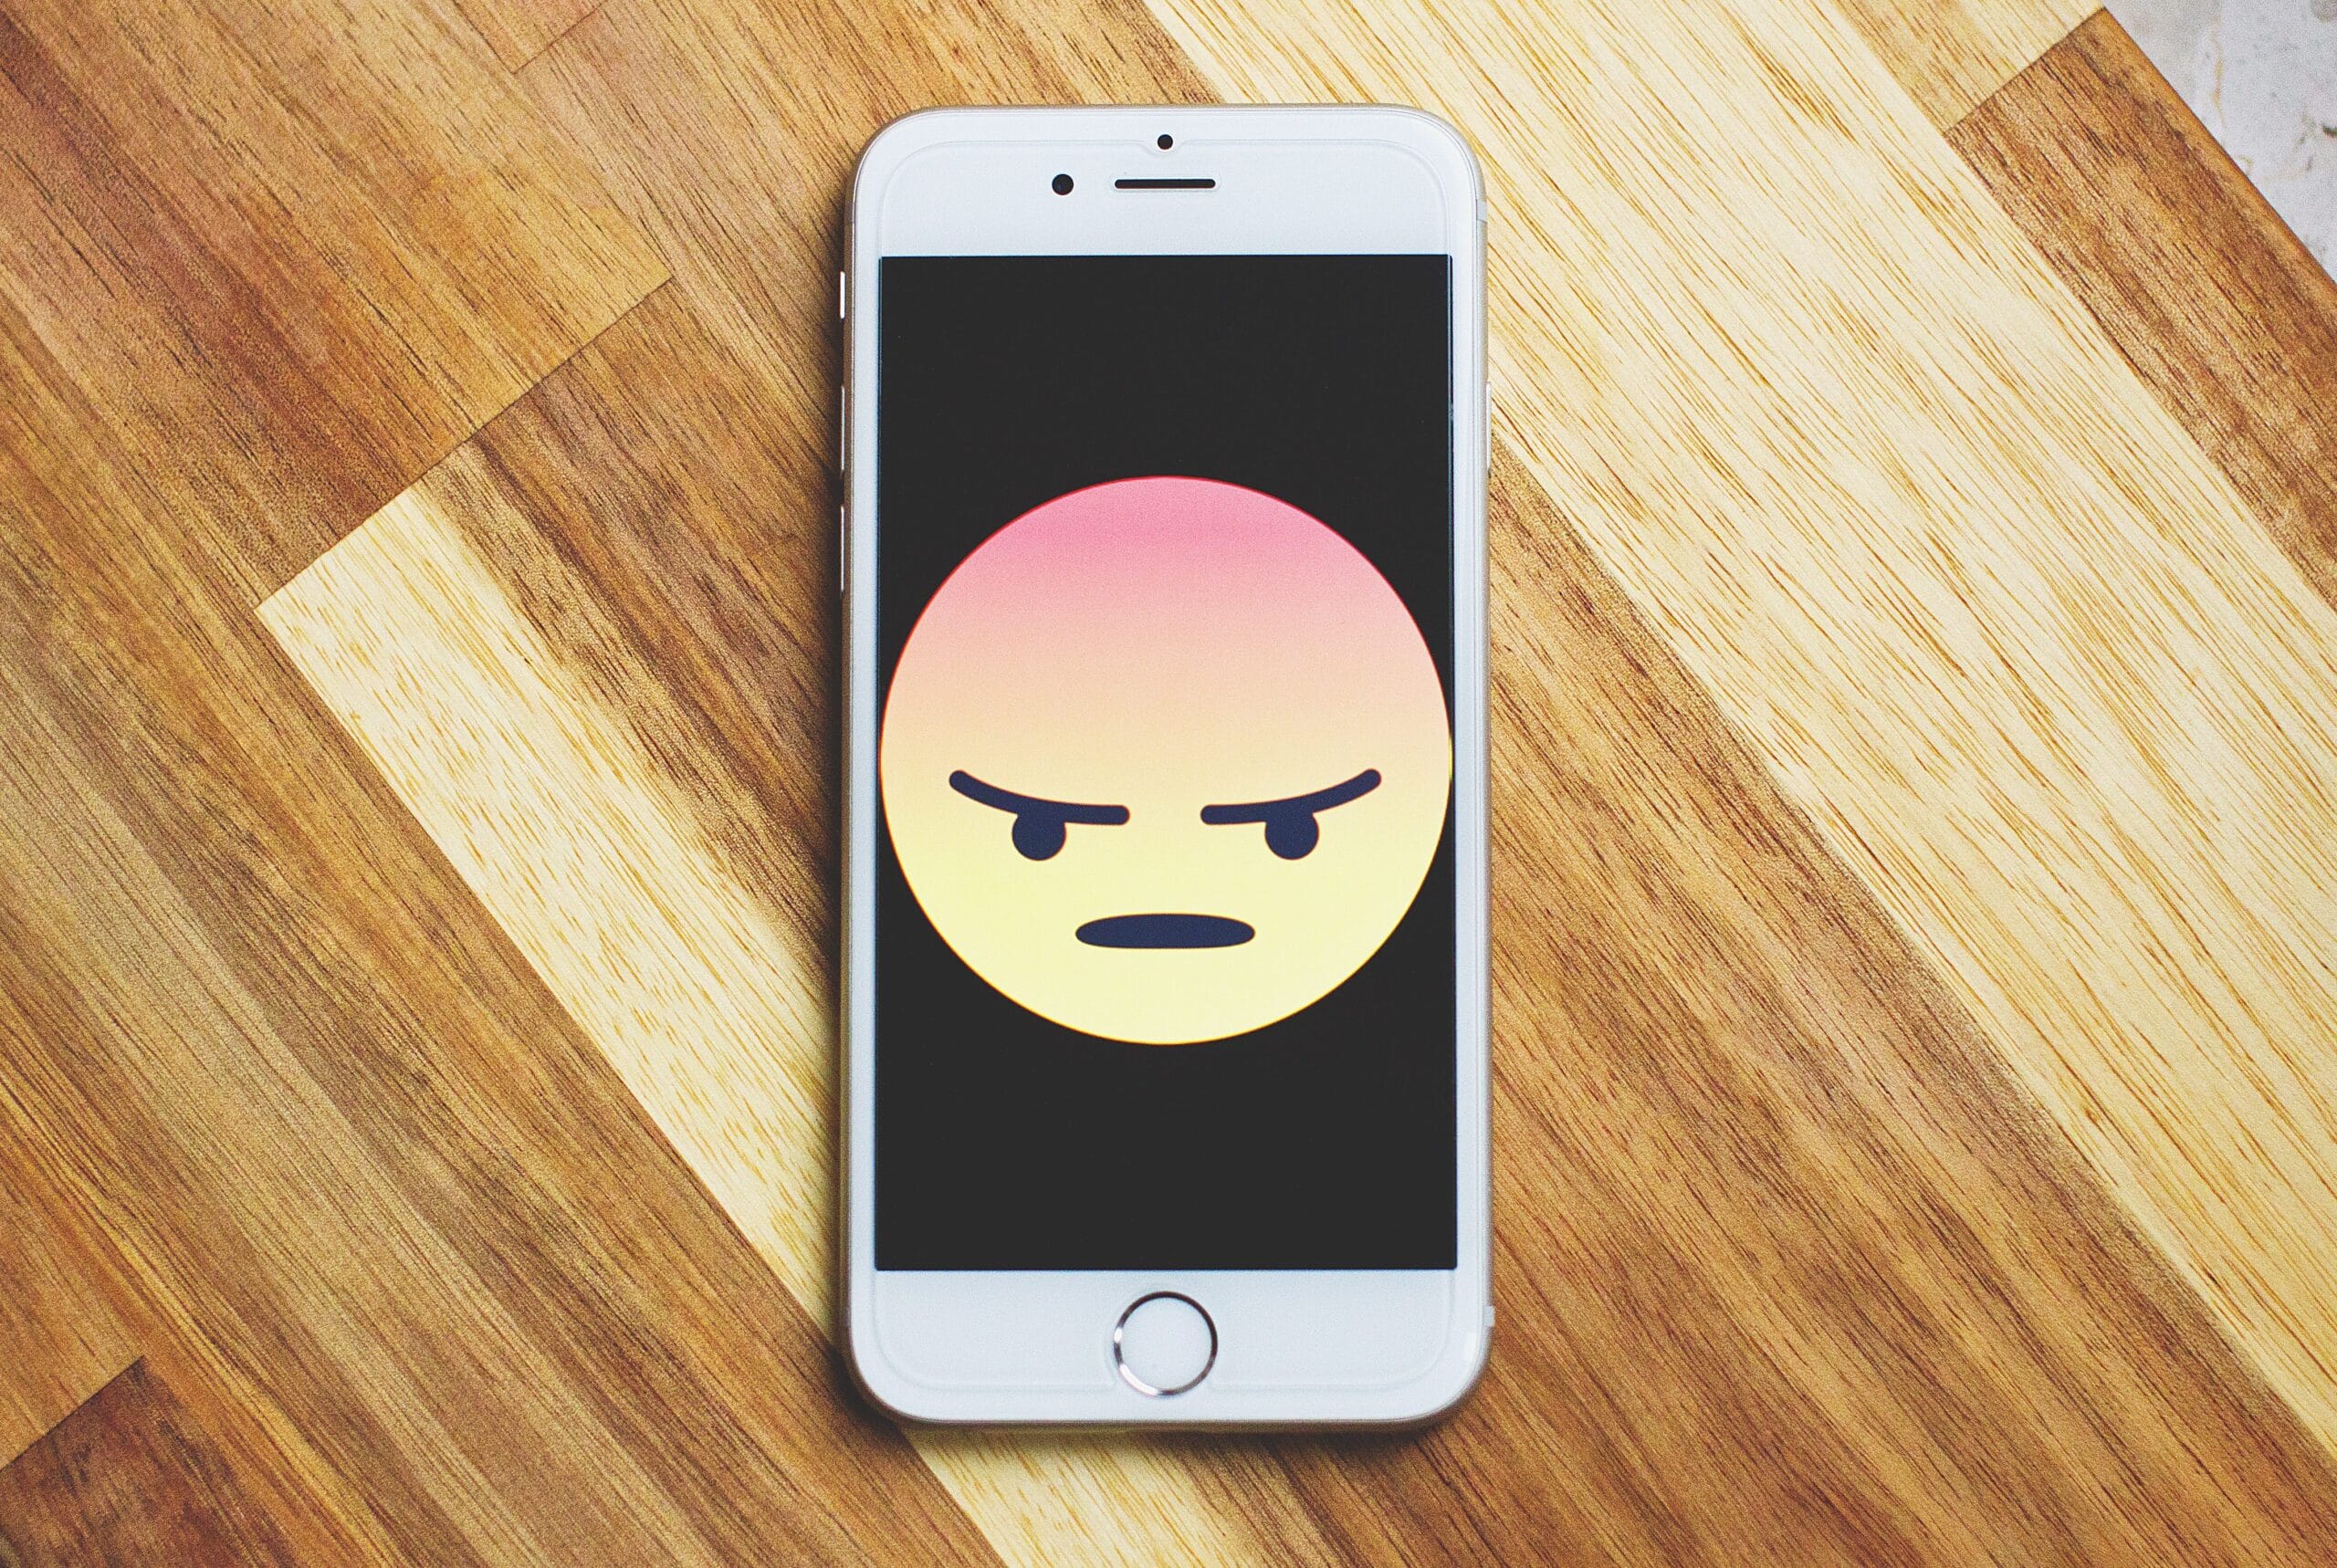 iPhone with large angry emoji